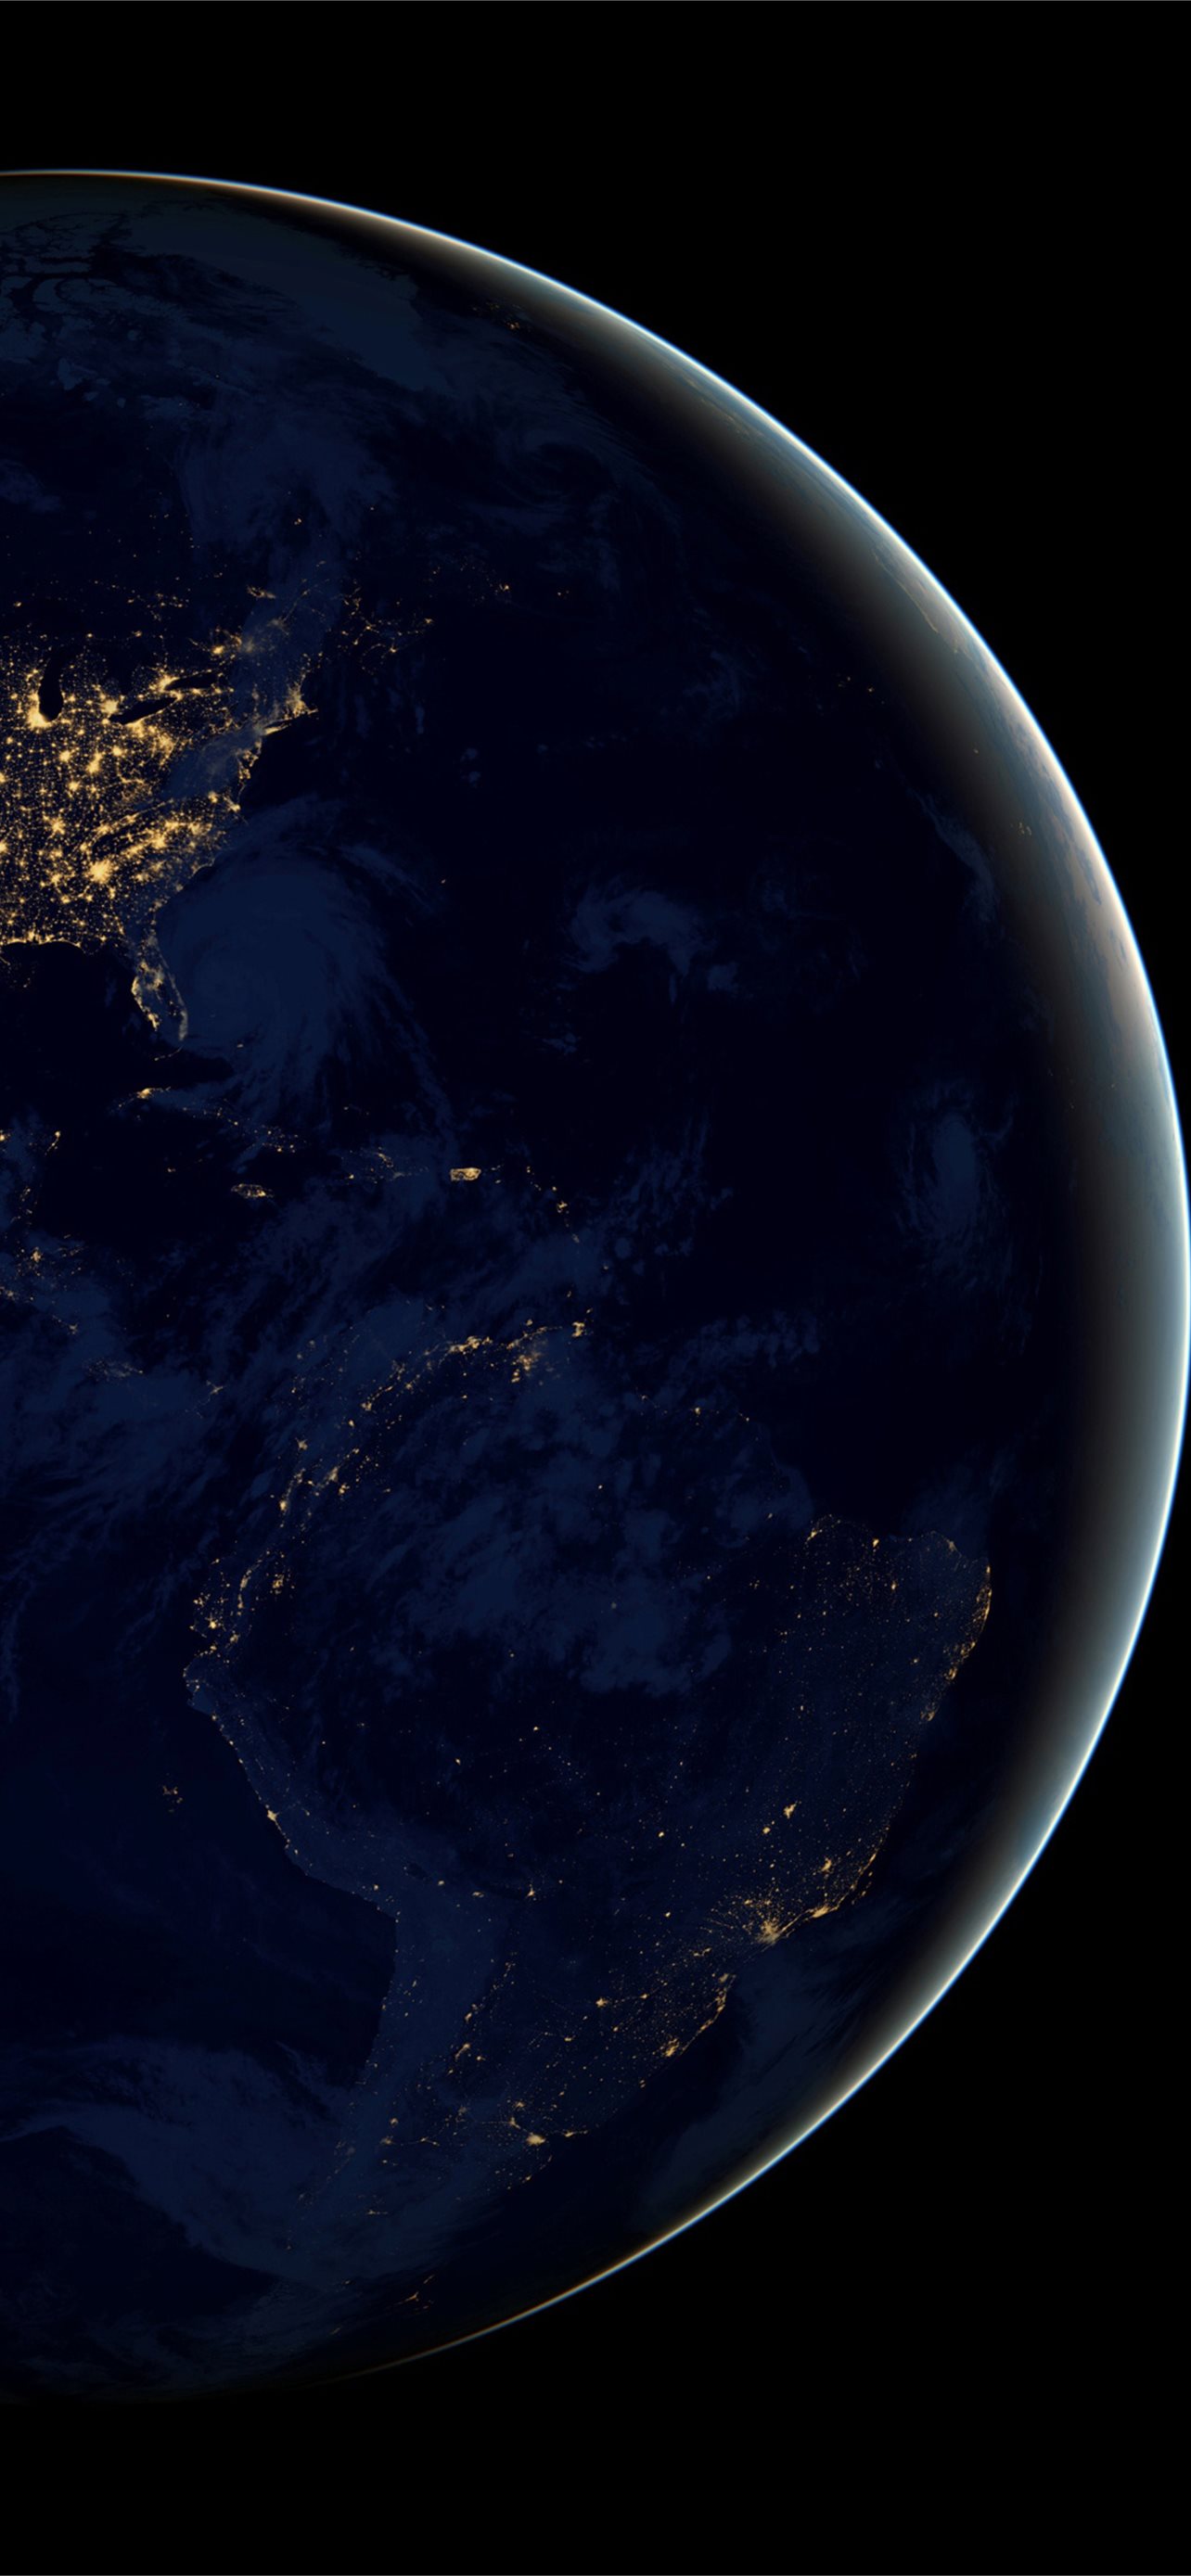 Earth From Space 4k Samsung Galaxy Note 9 8 S9 S8. iPhone Wallpaper Free Download